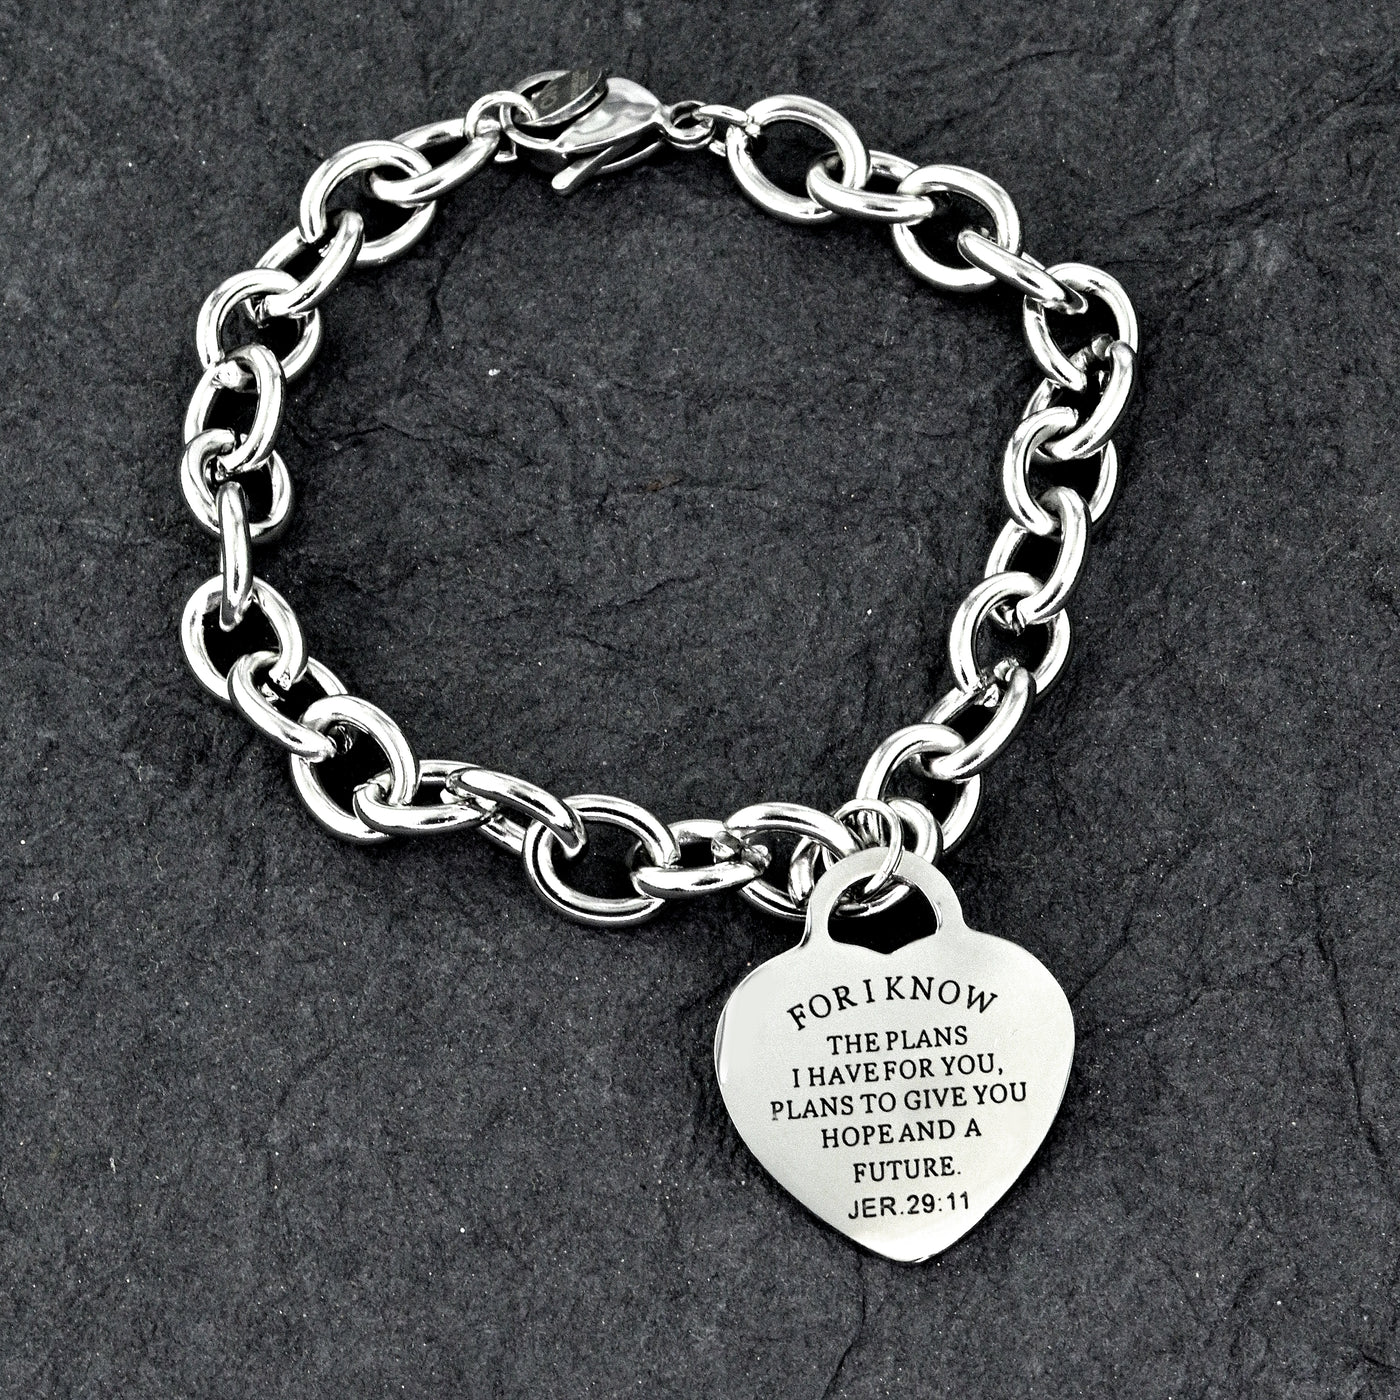 Destiny Heart Bracelet-Good Work(s) Make A Difference® | Christian and Inspirational Jewelry Company in Vernon, California